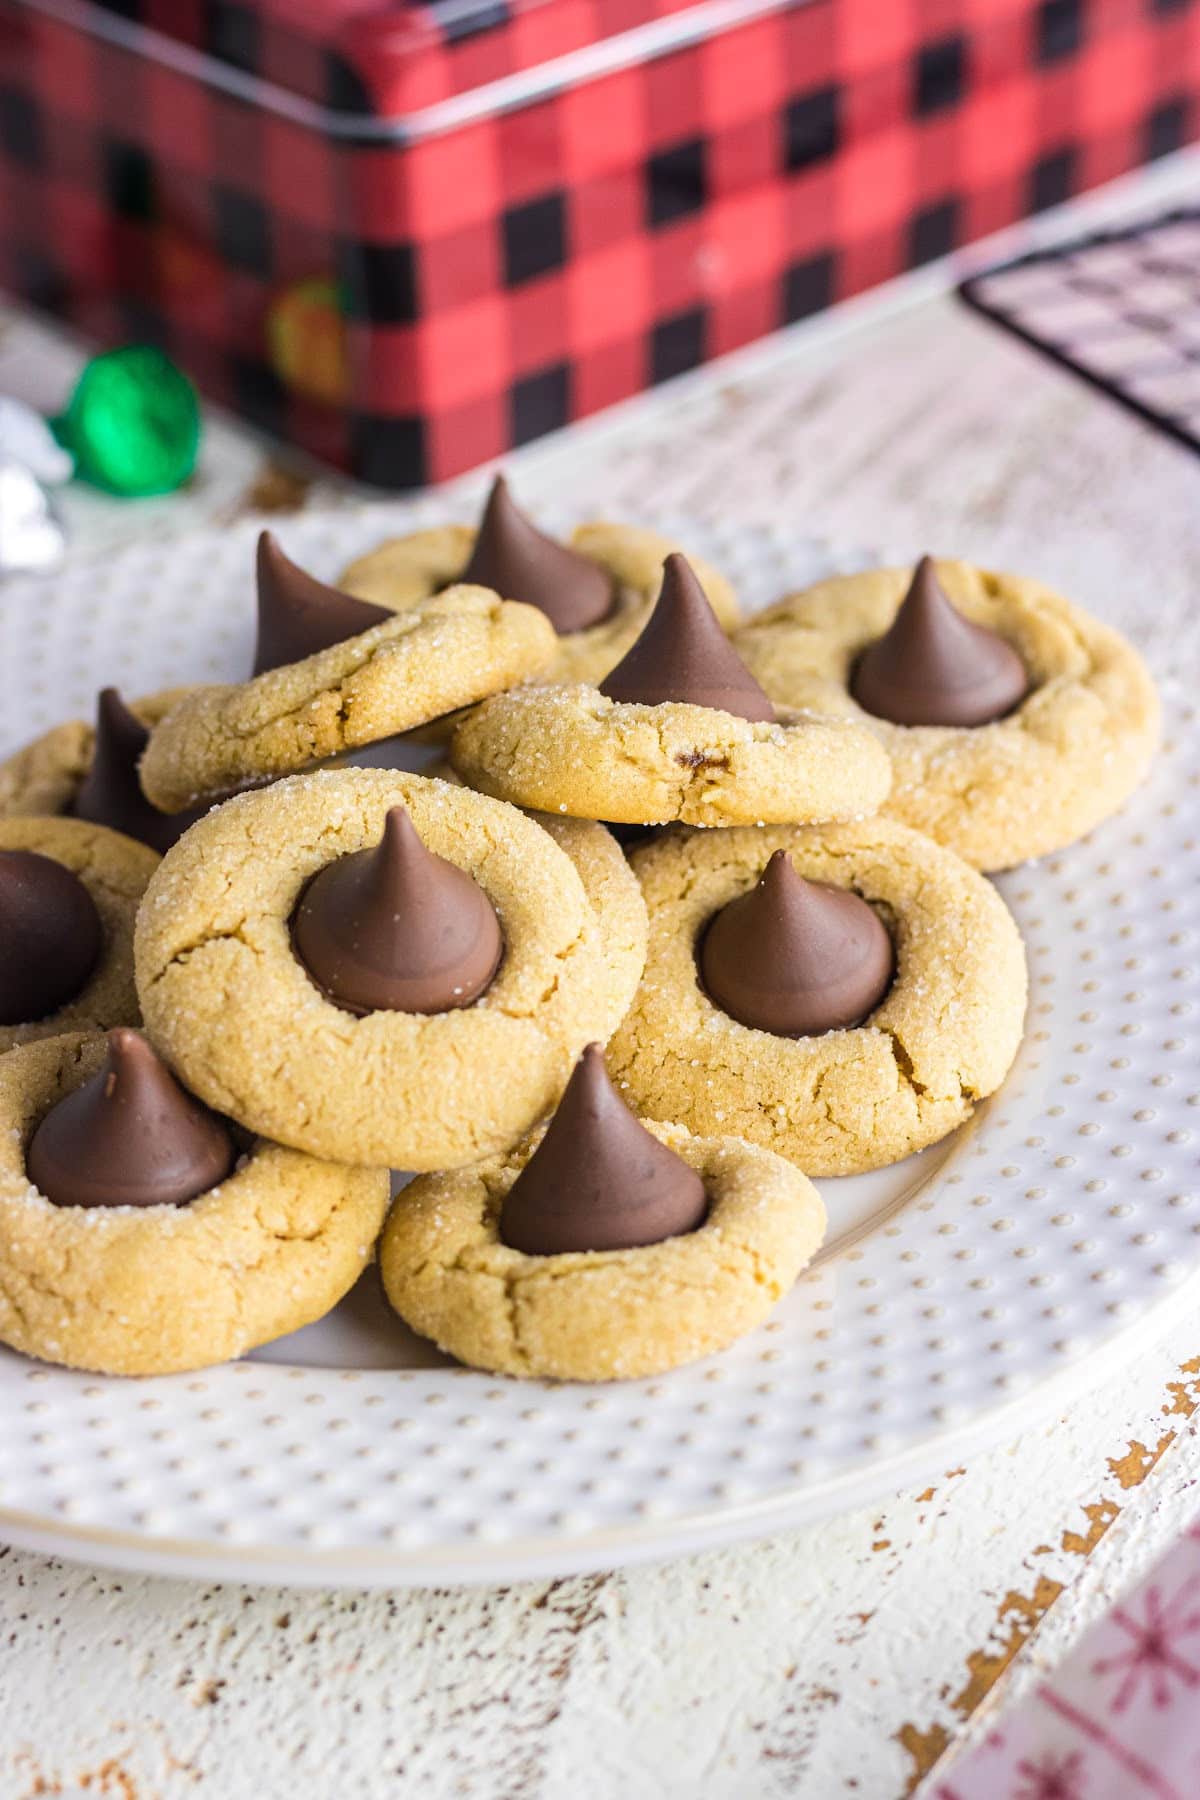 A plate of Hershey's peanut butter blossoms cookies on a table.